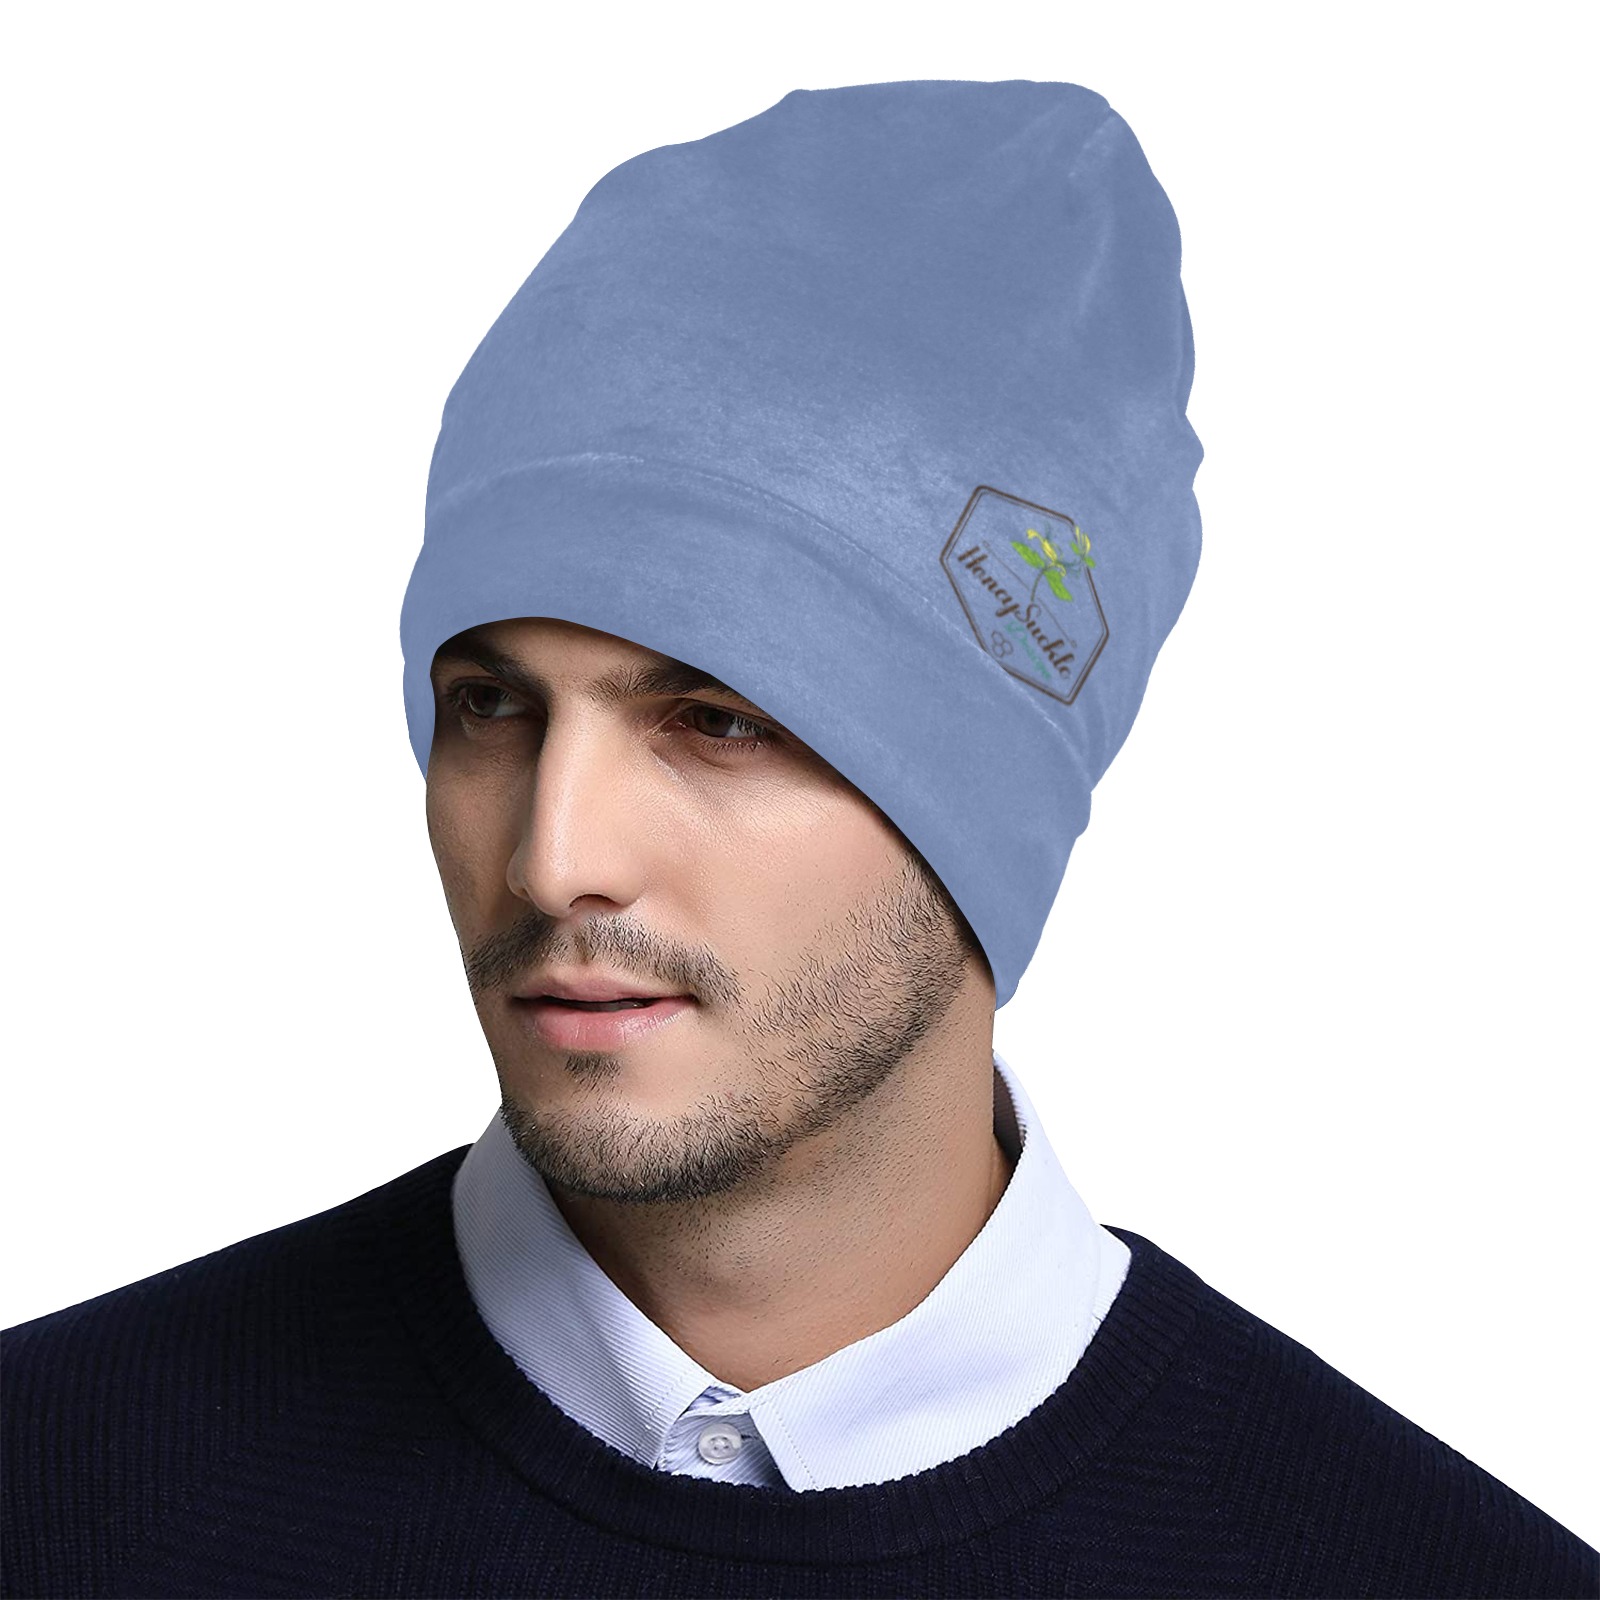 Blue Gray Beanie Collection All Over Print Beanie for Adults